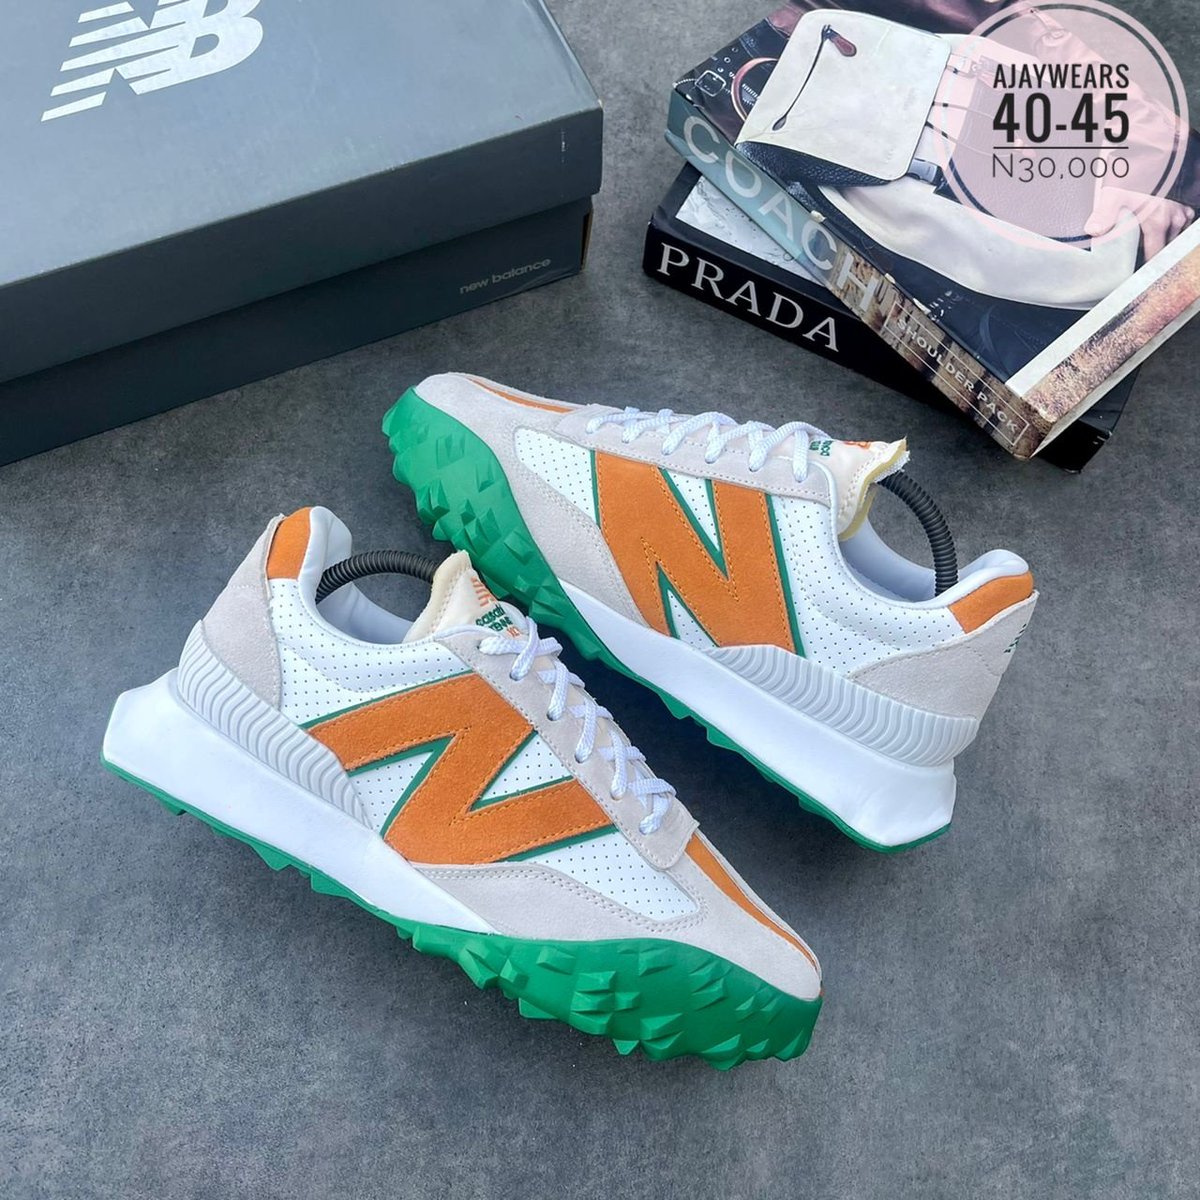 NB Sneakers 40-45 N30,000 We deliver nationwide. Kindly send us a dm or WhatsApp wa.me/2347042077438 to order.